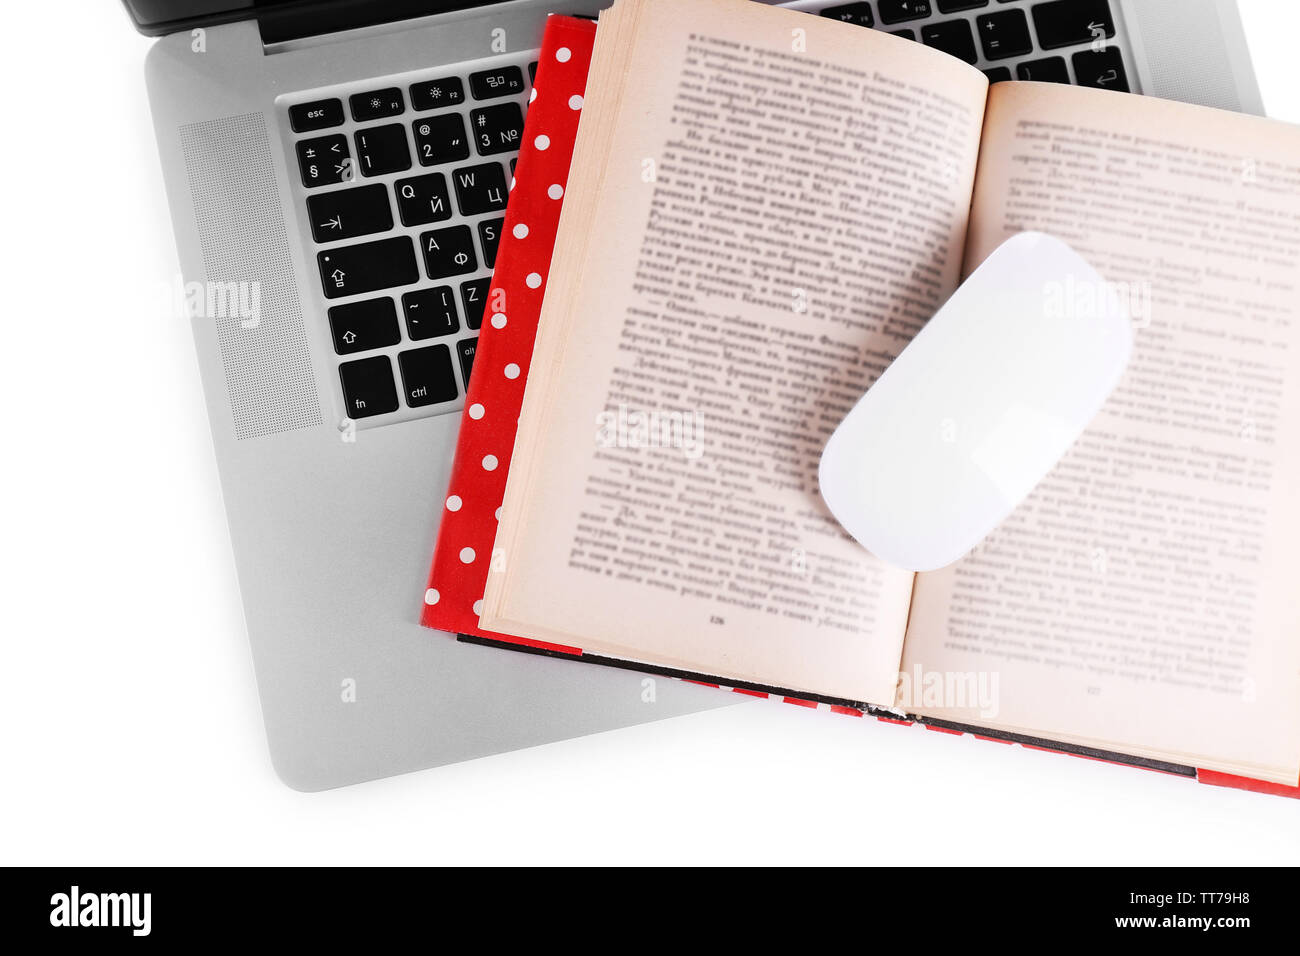 Laptop, open book and computer mouse on white background Stock Photo - Alamy